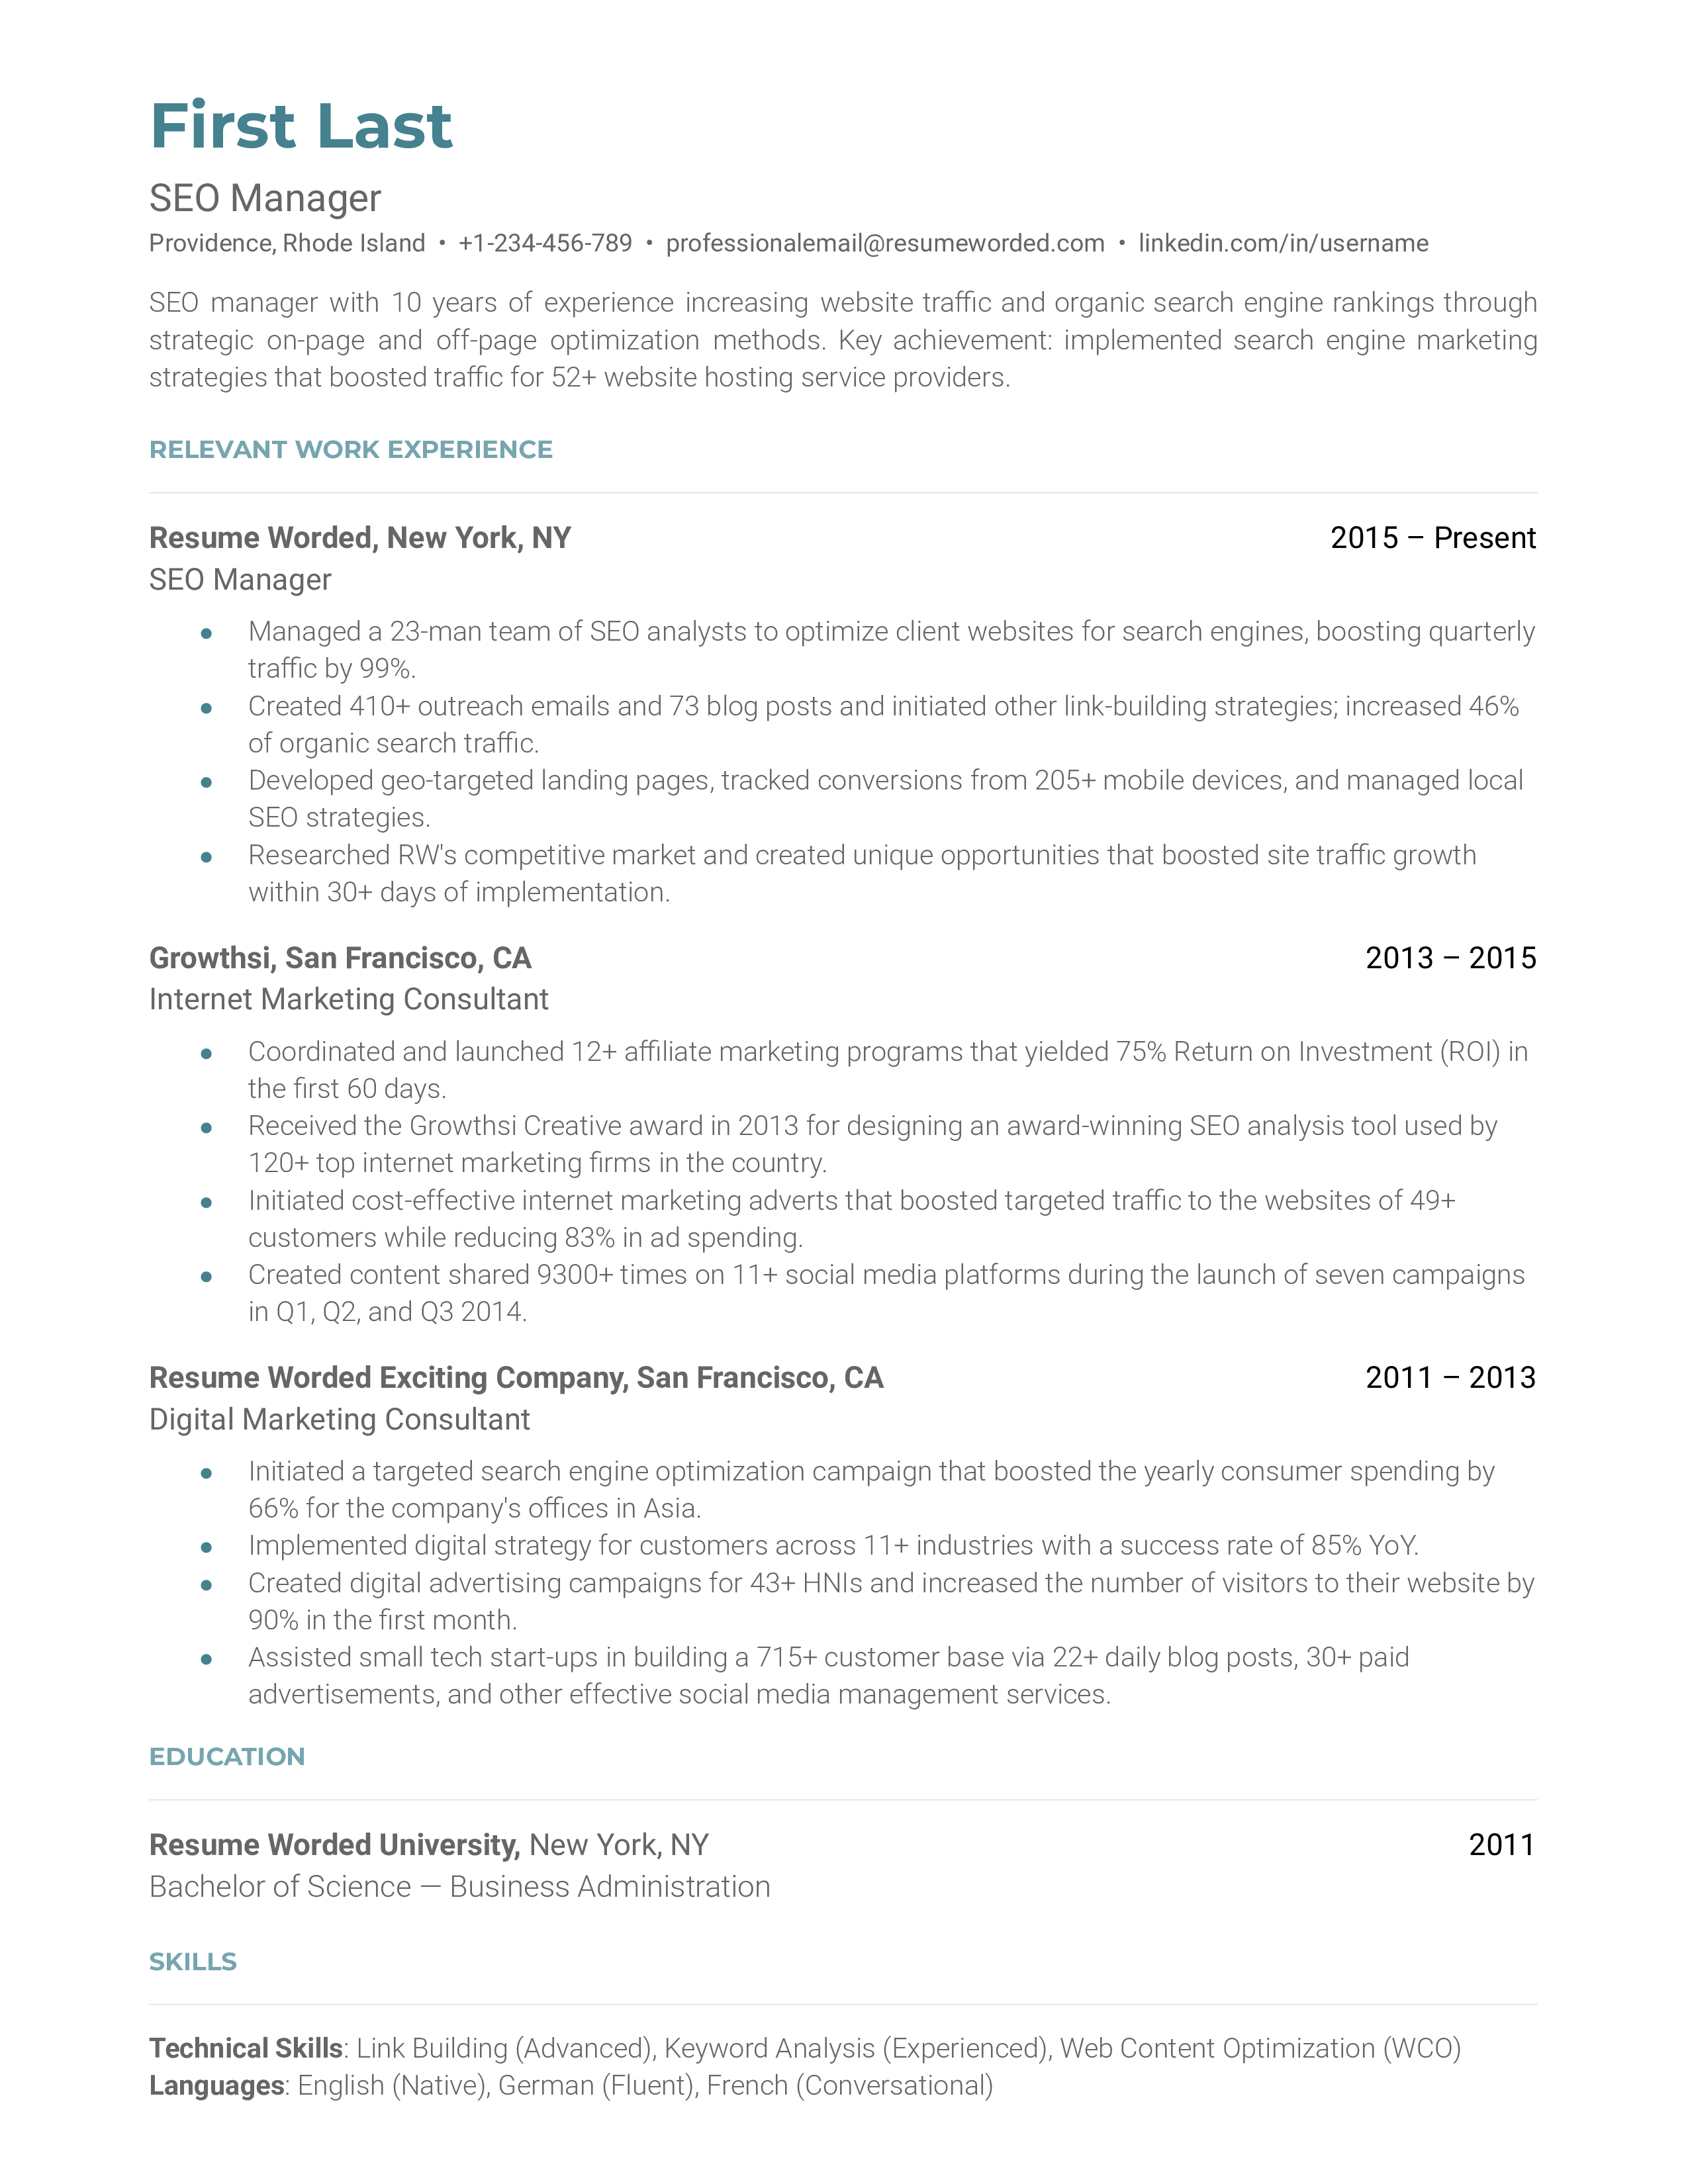 An SEO Manager resume template highlighting relevant marketing experience.